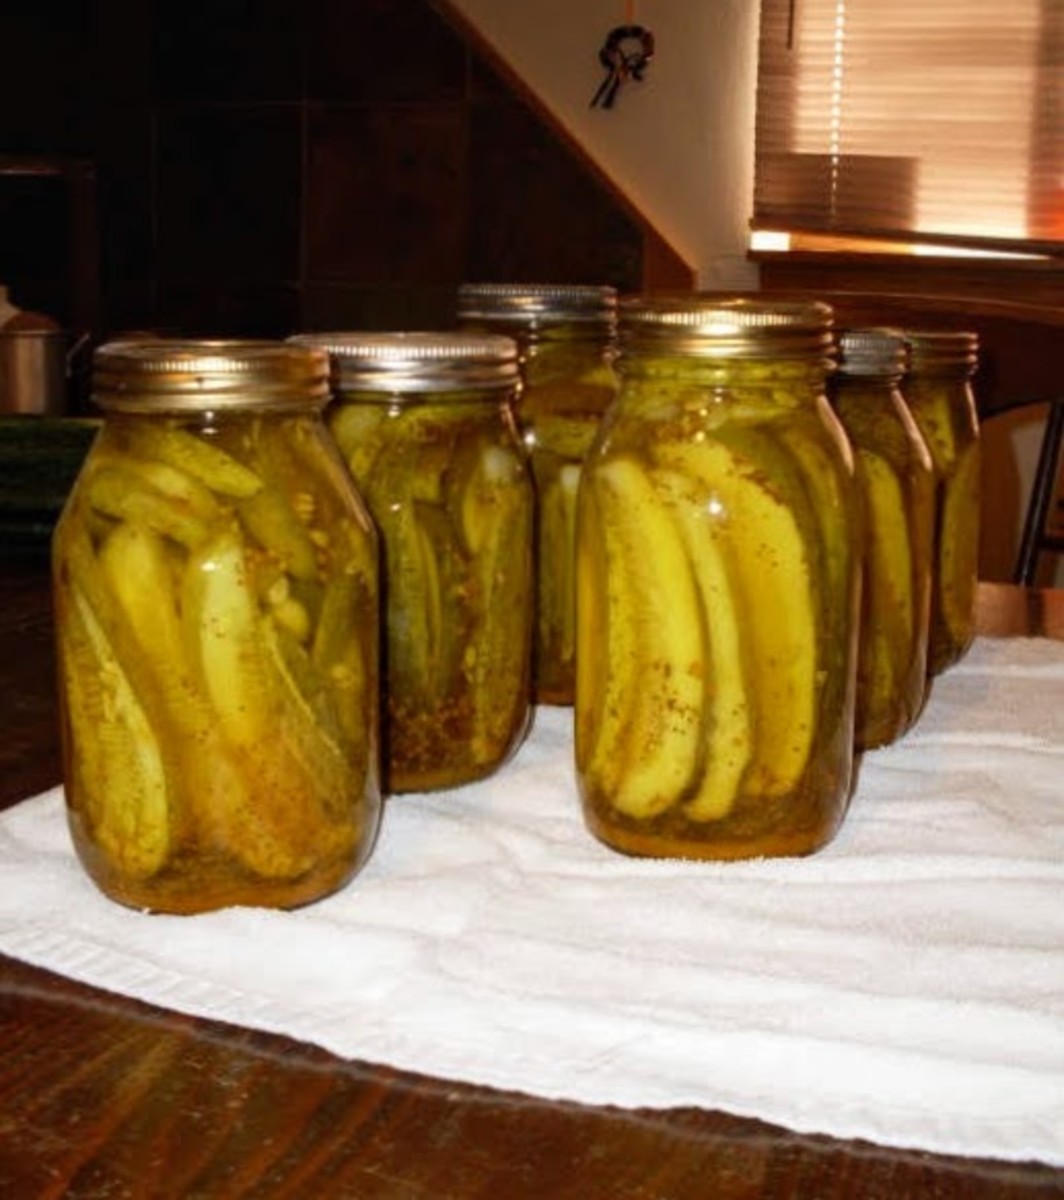 Let sit overnight. Jars often "pop" or "ping" as they seal. Wash outsides of jars with mild, soapy water to remove any hard water stains or pickling residues.